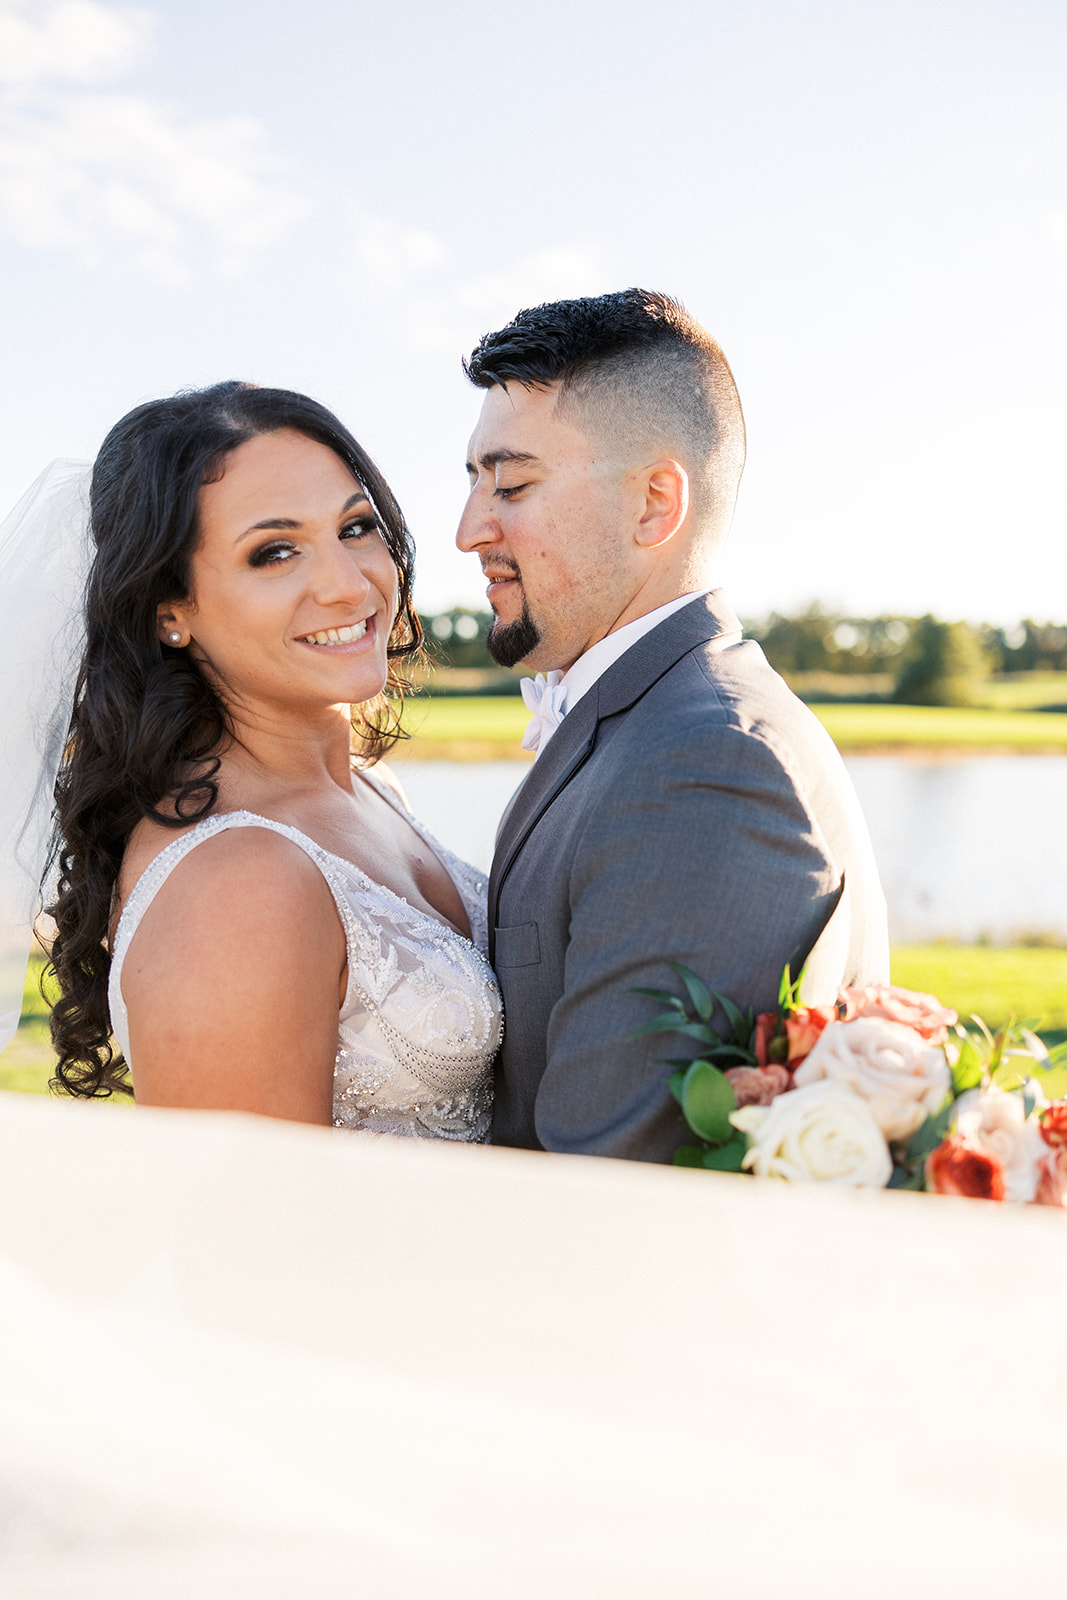 A bride smiles big while being hugged by her new husband on a lakeside lawn at New Jersey Waterfront Wedding Venues